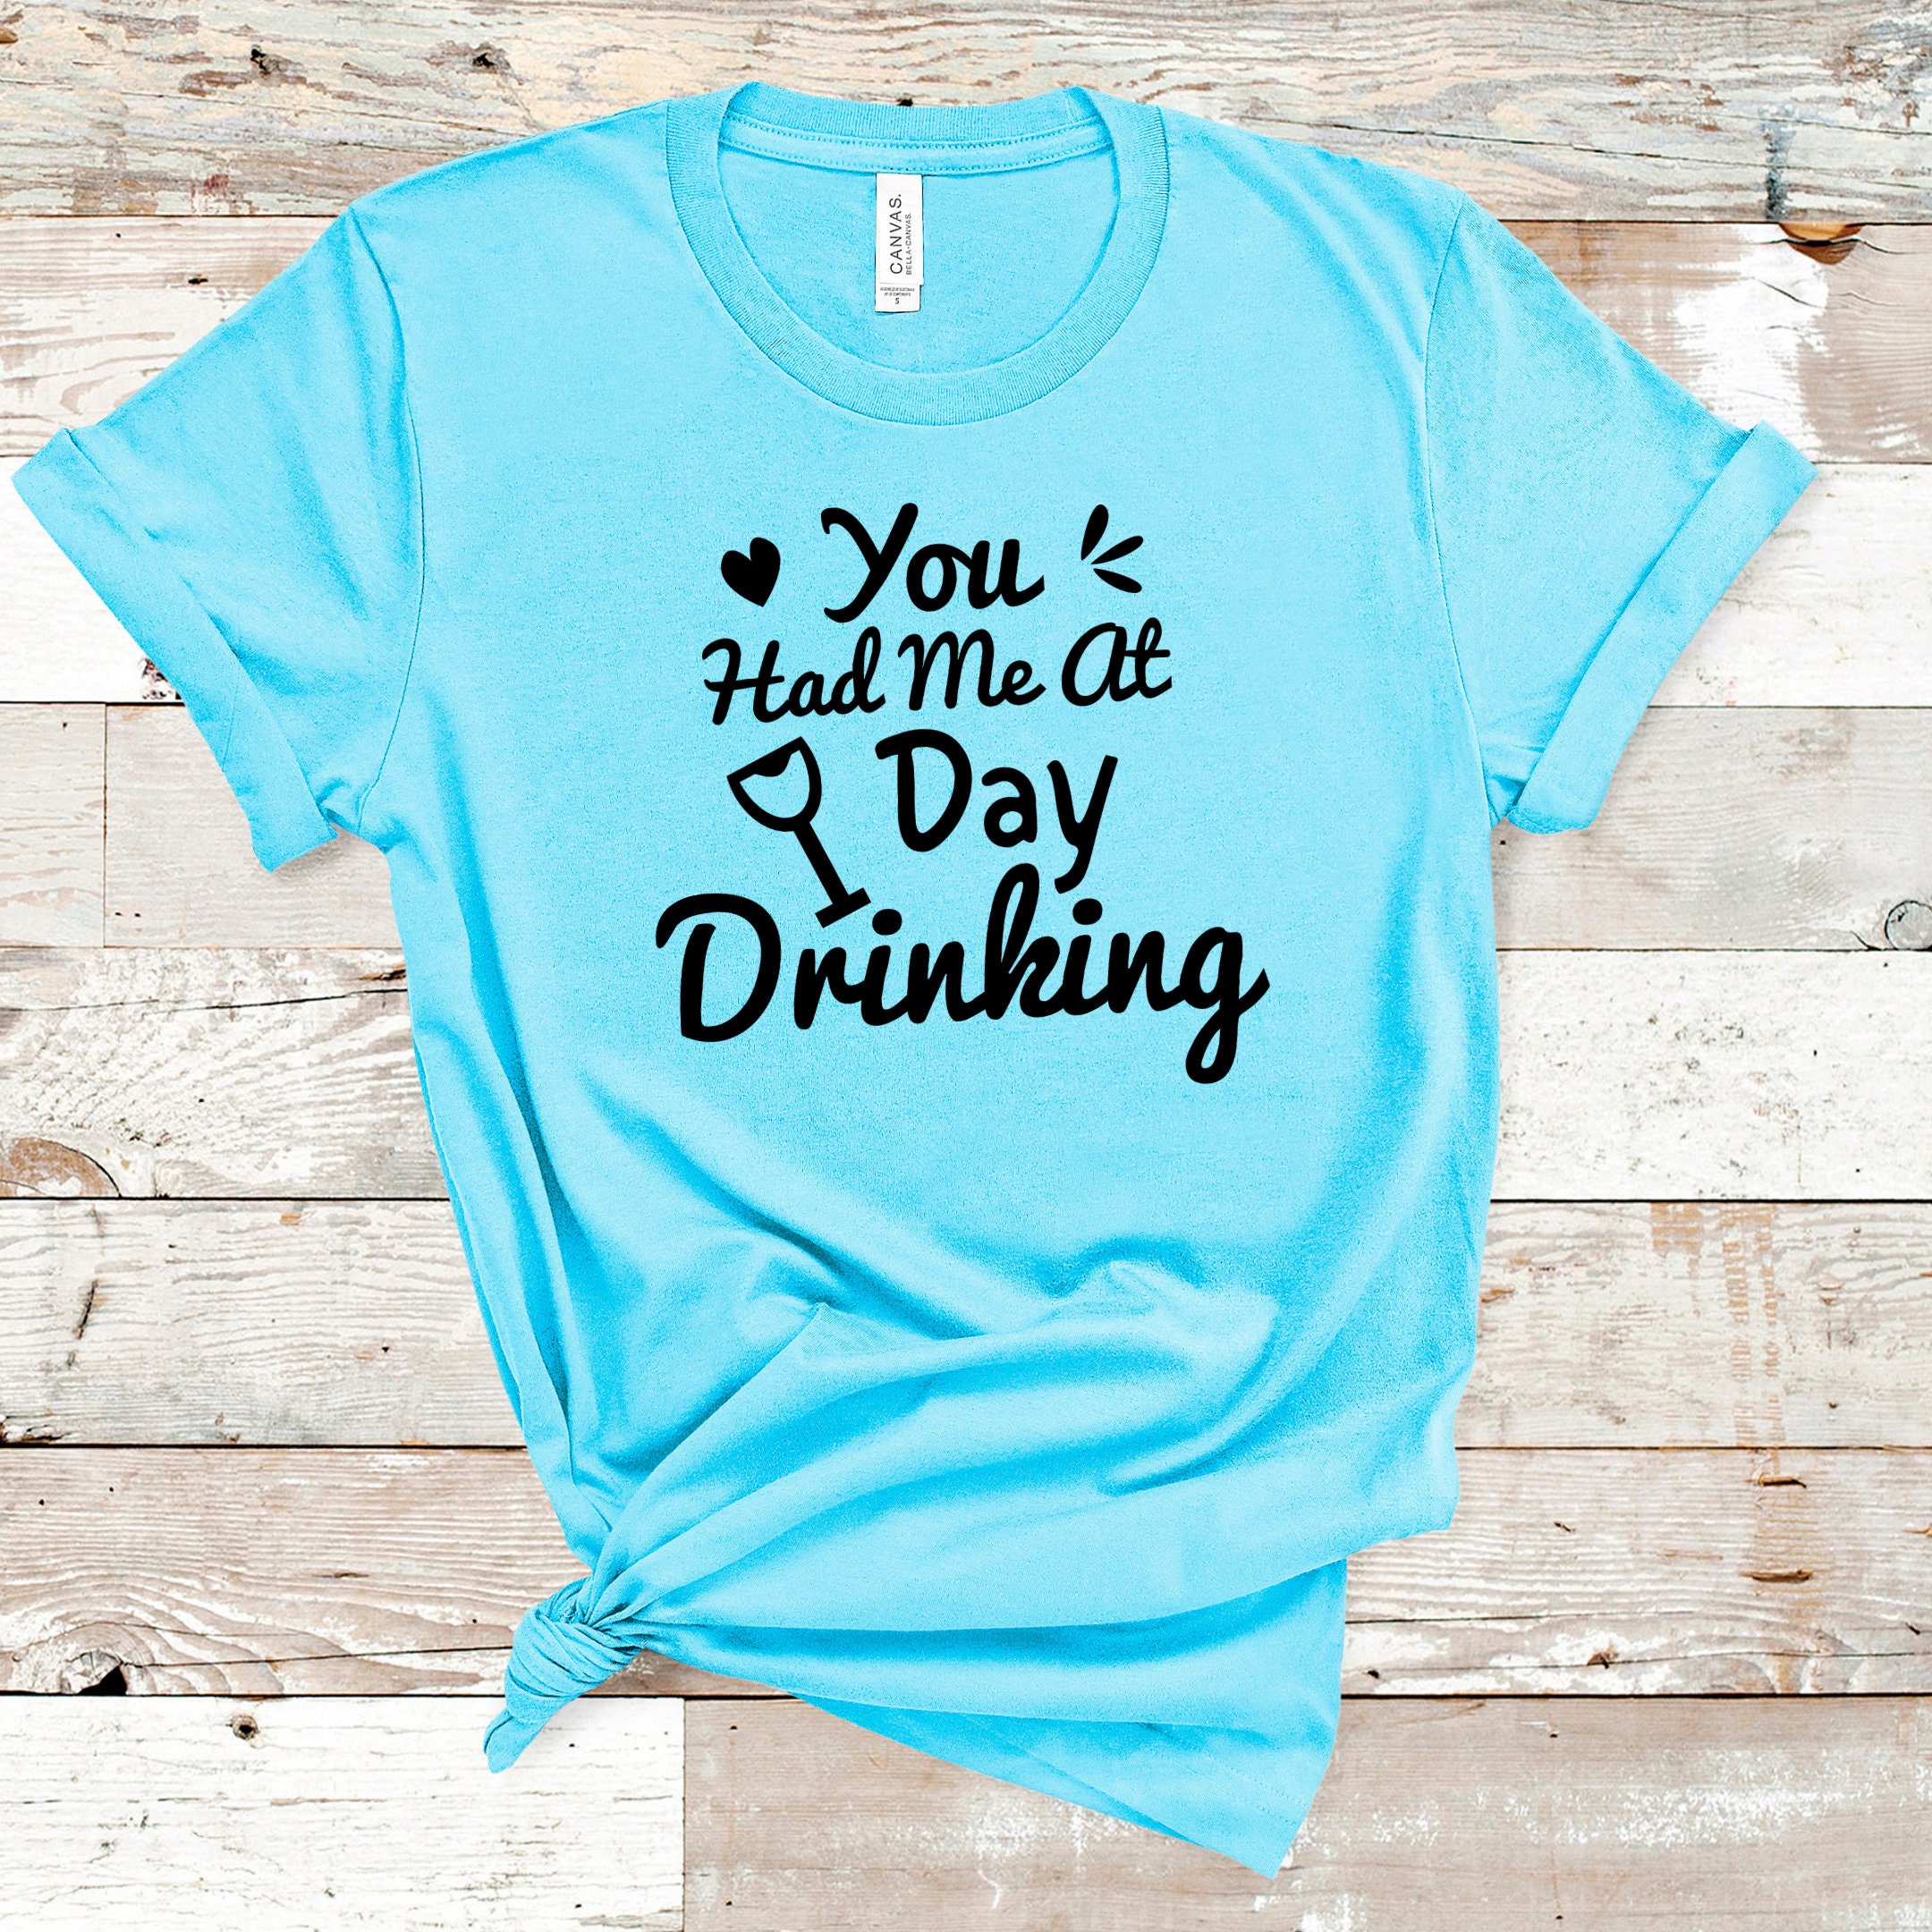 You Had Me at Day Drinking / Funny Drinking Shirt / Short | Etsy